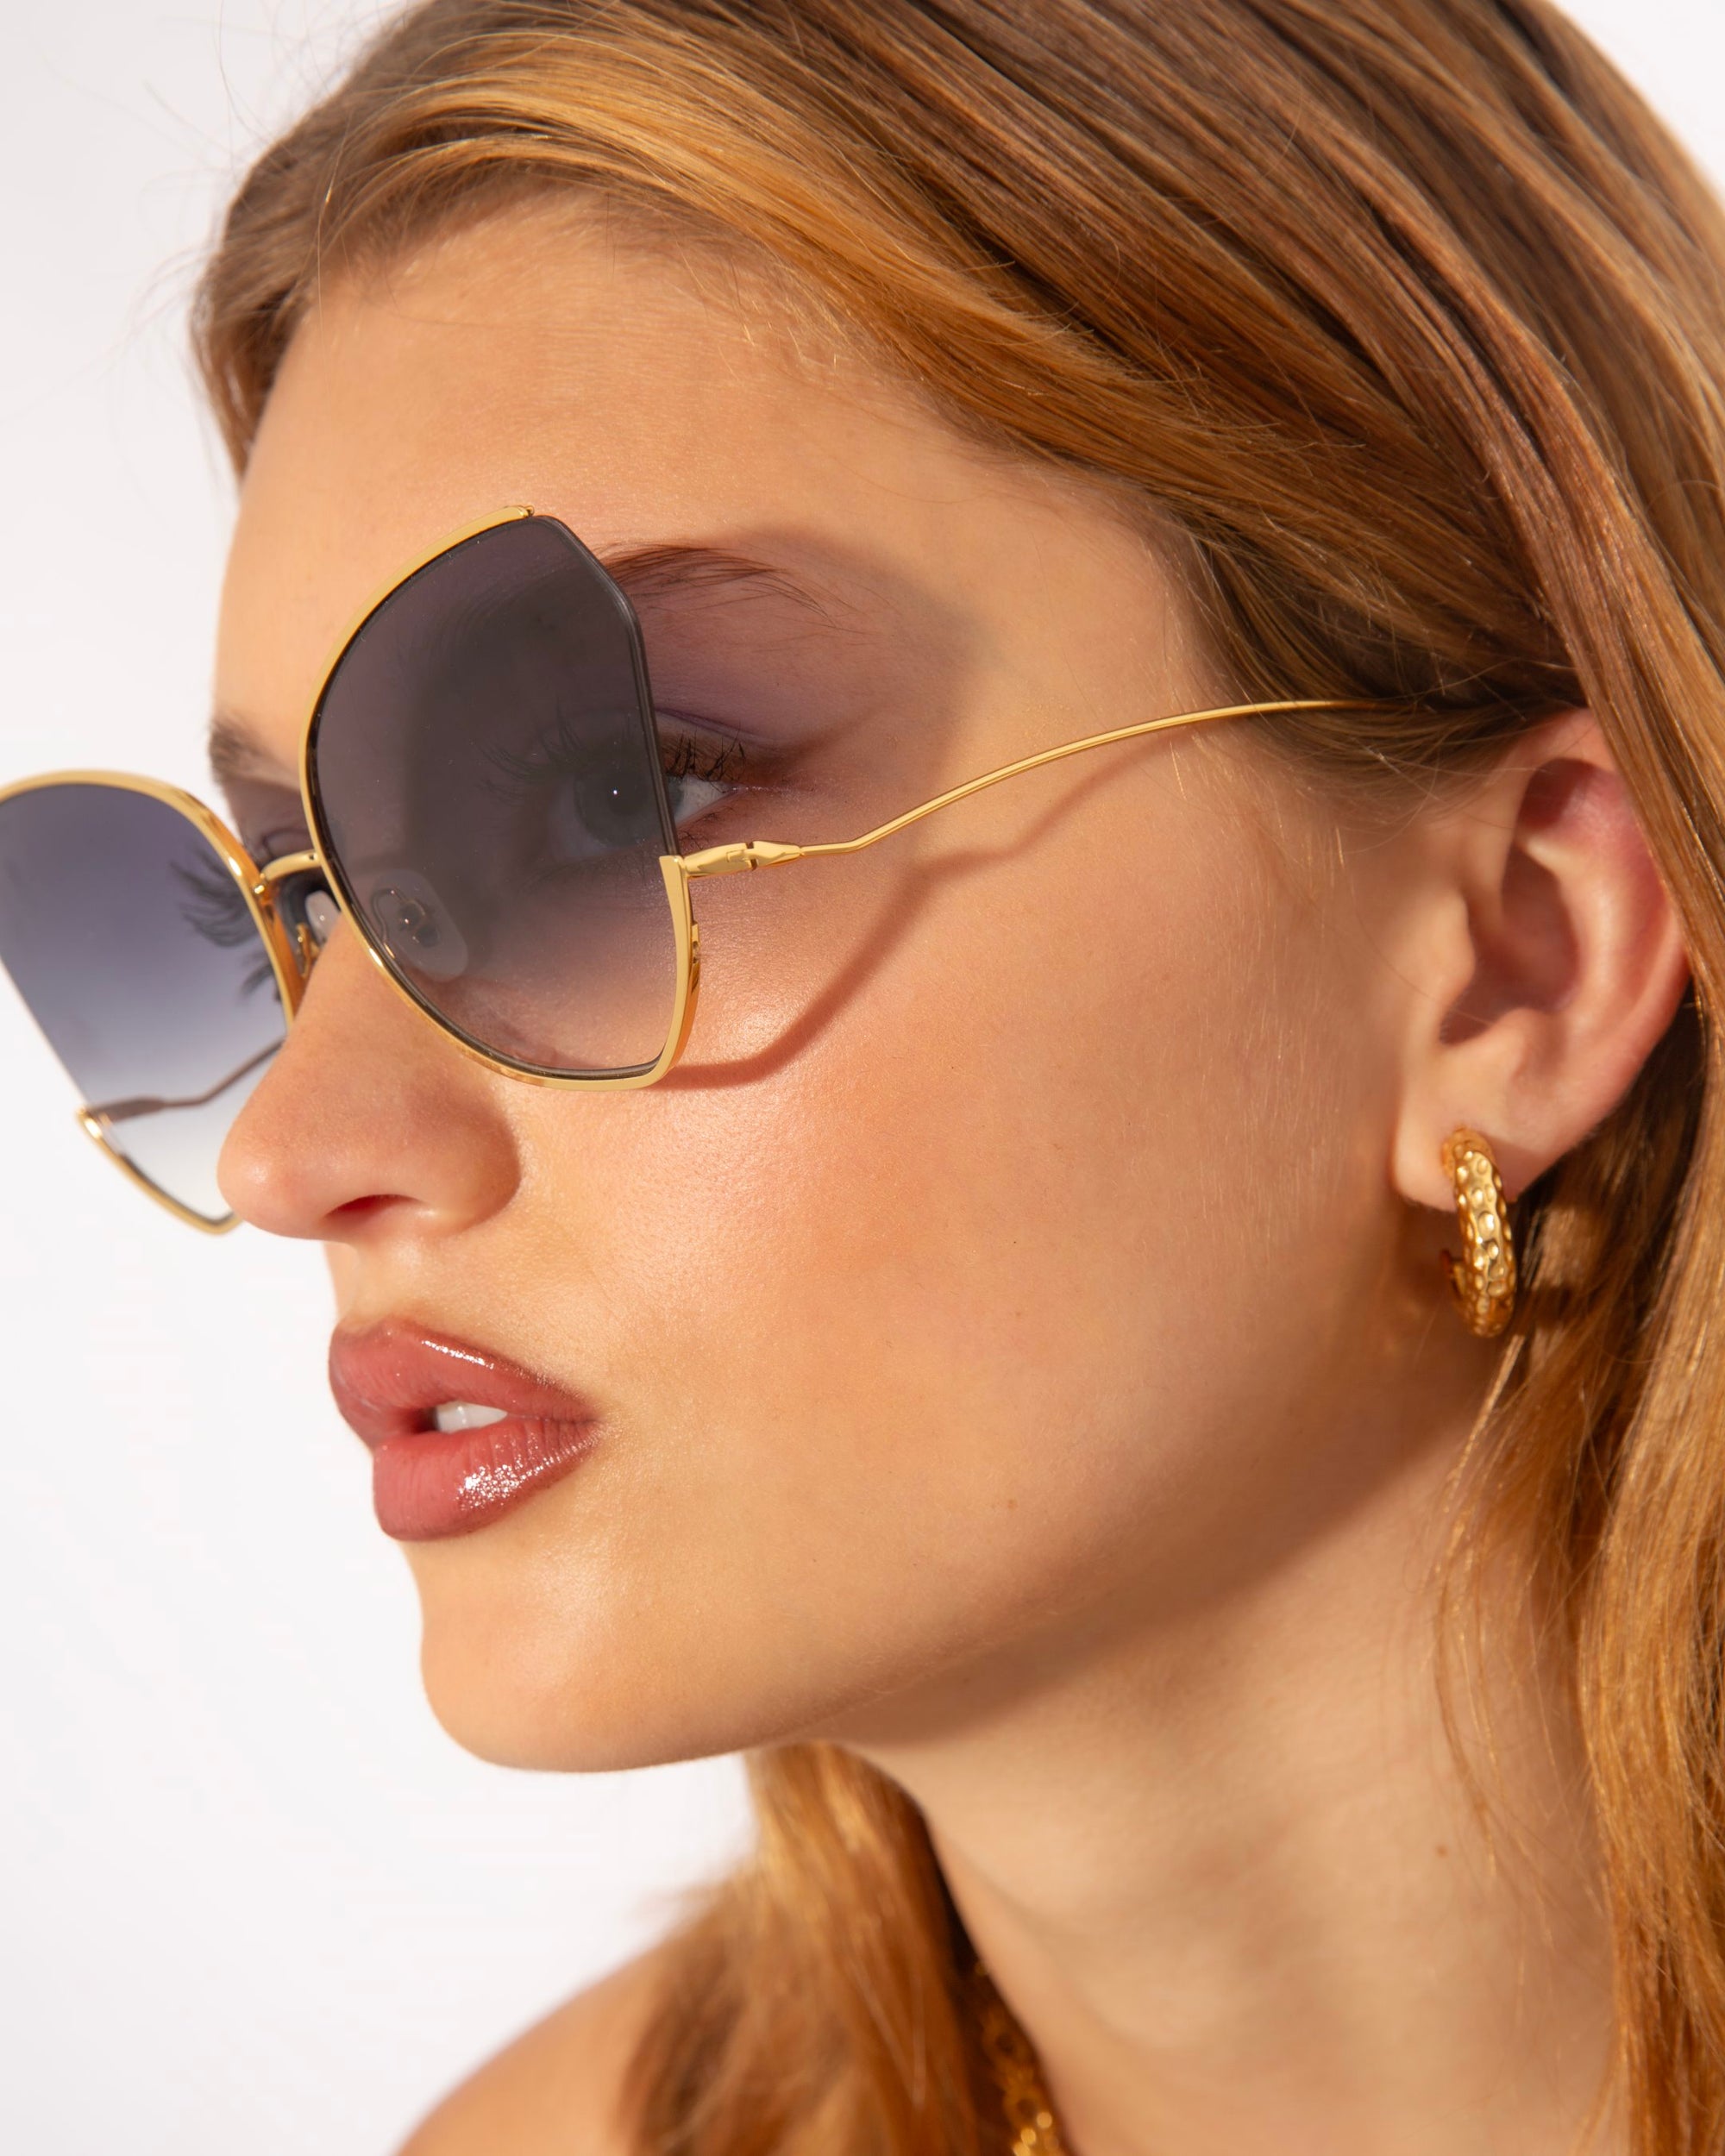 A woman with long, light brown hair is wearing large, dark Watercolour sunglasses by For Art&#39;s Sake® and gold-plated stainless steel hoop earrings. Her lips are glossed, and she is gazing to the side. The background is white, making her accessories stand out.